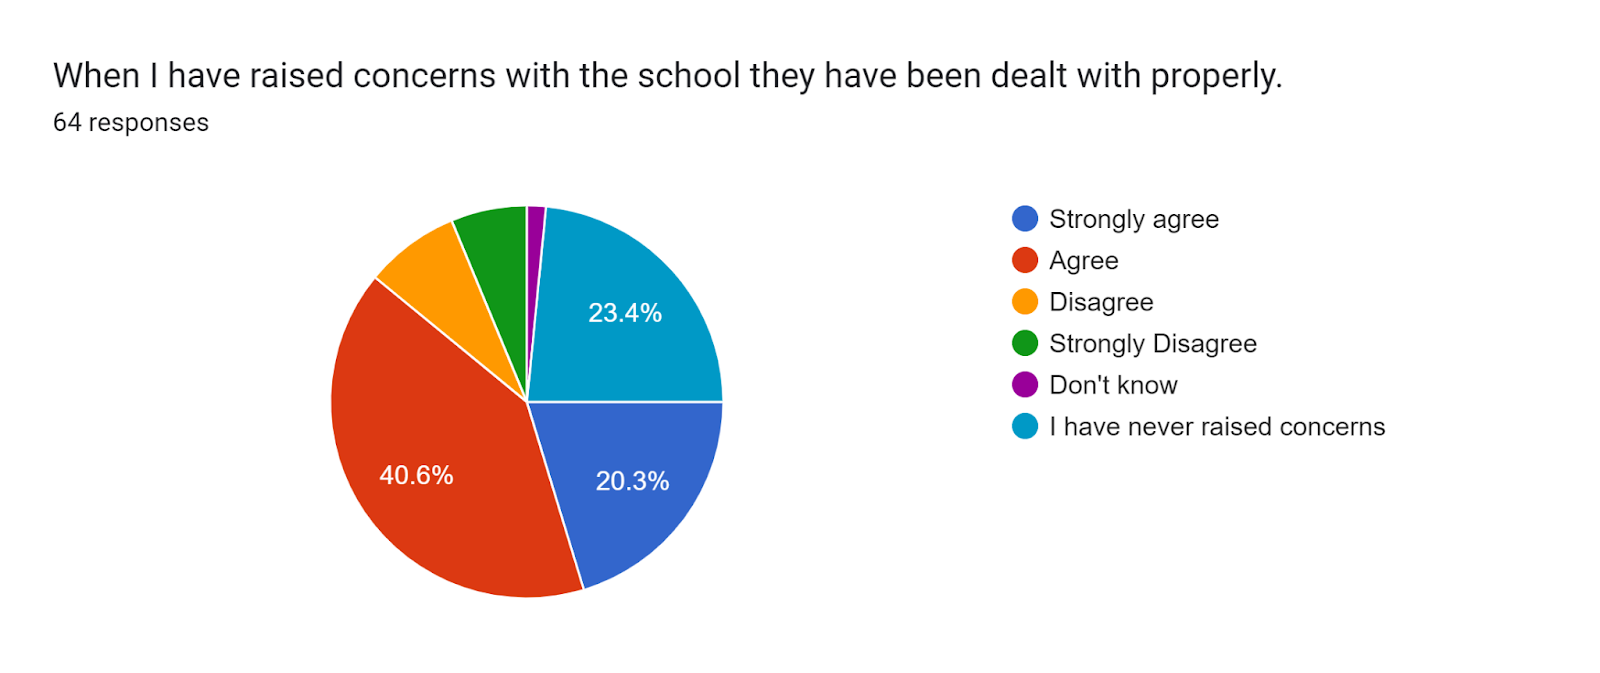 Forms response chart. Question title: When I have raised concerns with the school they have been dealt with properly.
. Number of responses: 64 responses.